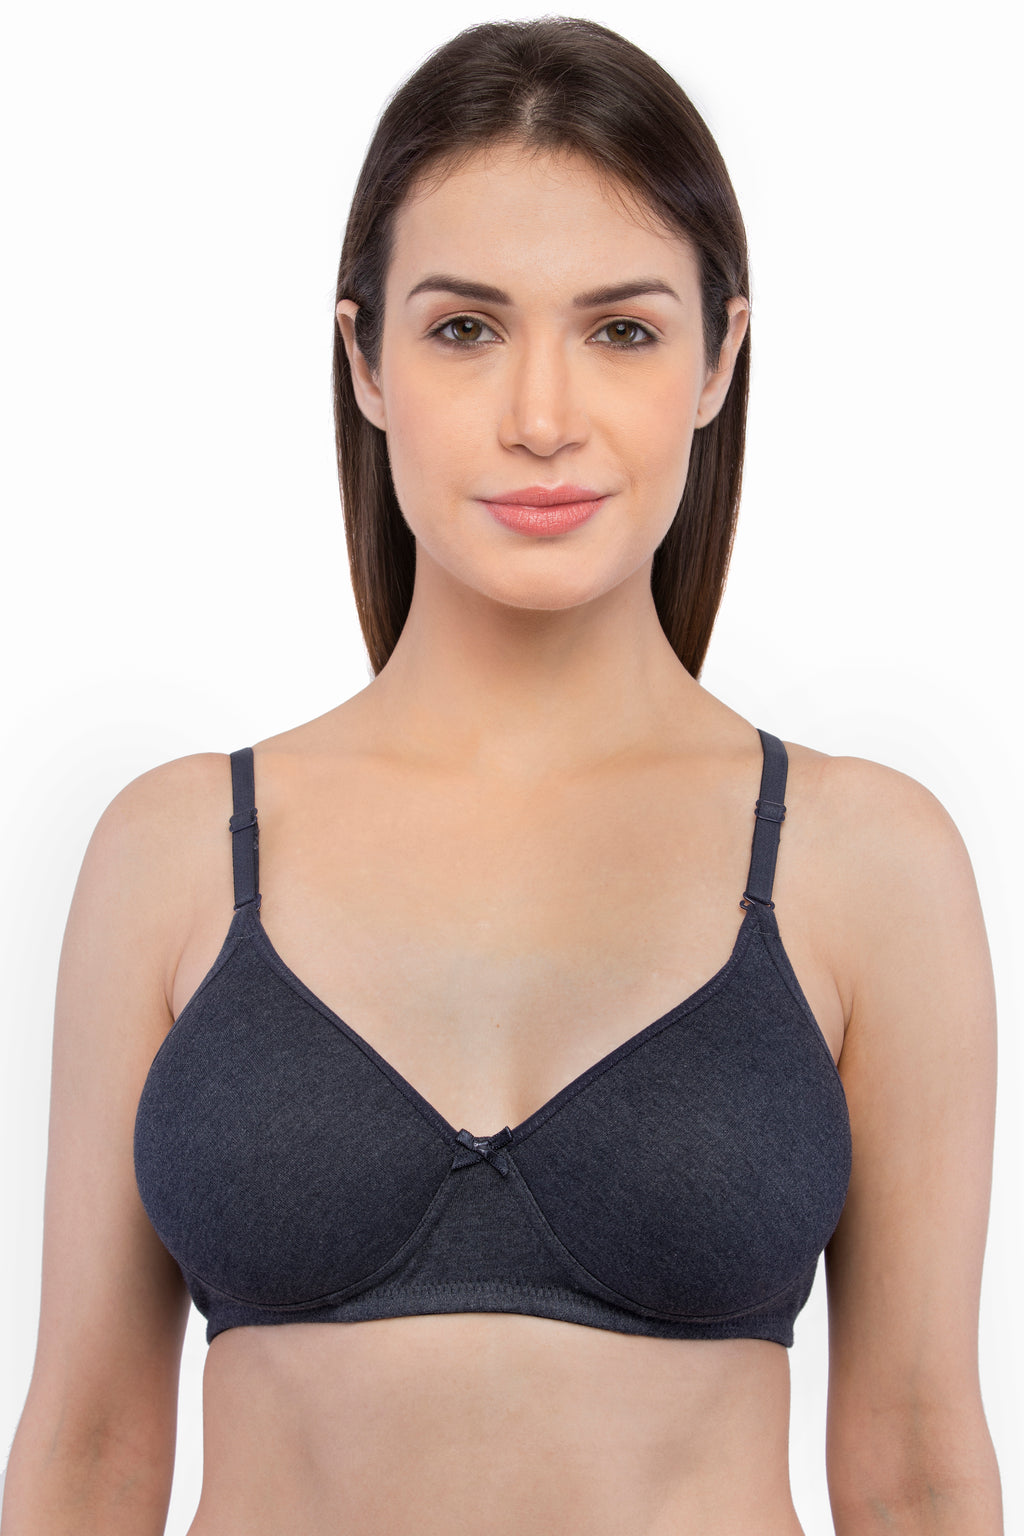 Buy A1 UNIQUE Women Cotton Half Padded, Non-Wired, Regular Fited